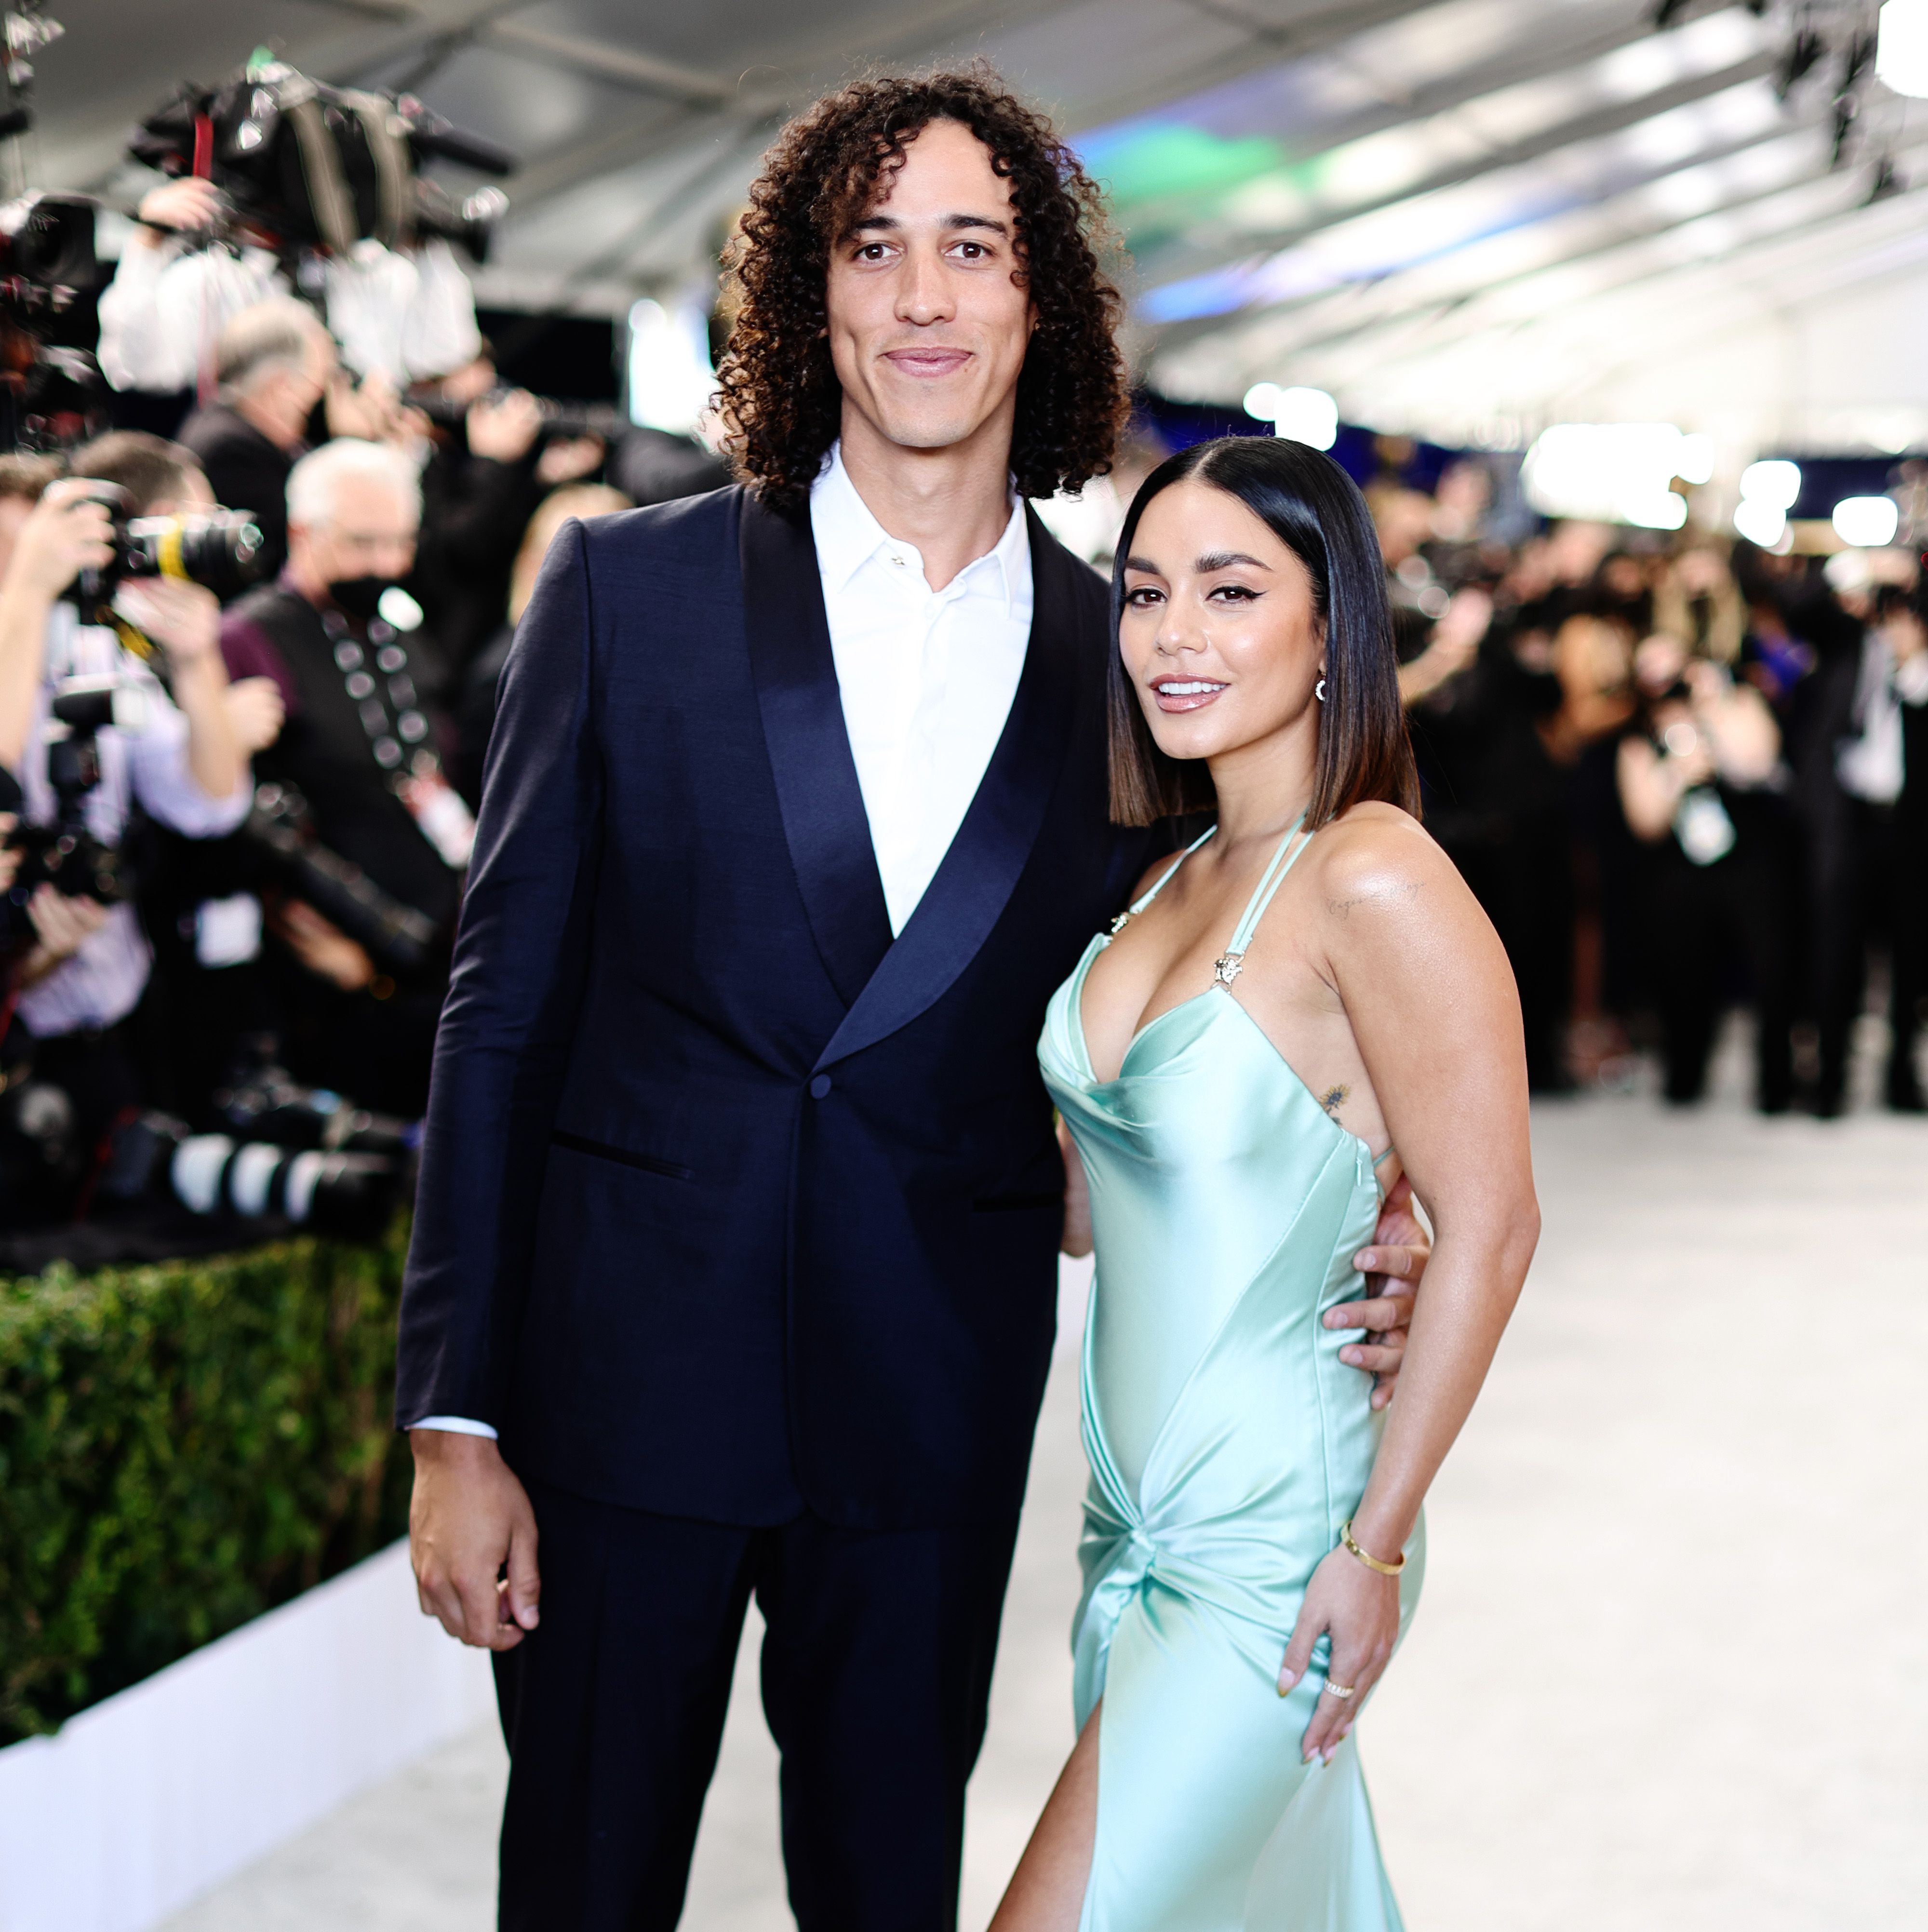 Hudgens' MLB boyfriend is said to have secretly proposed months ago.